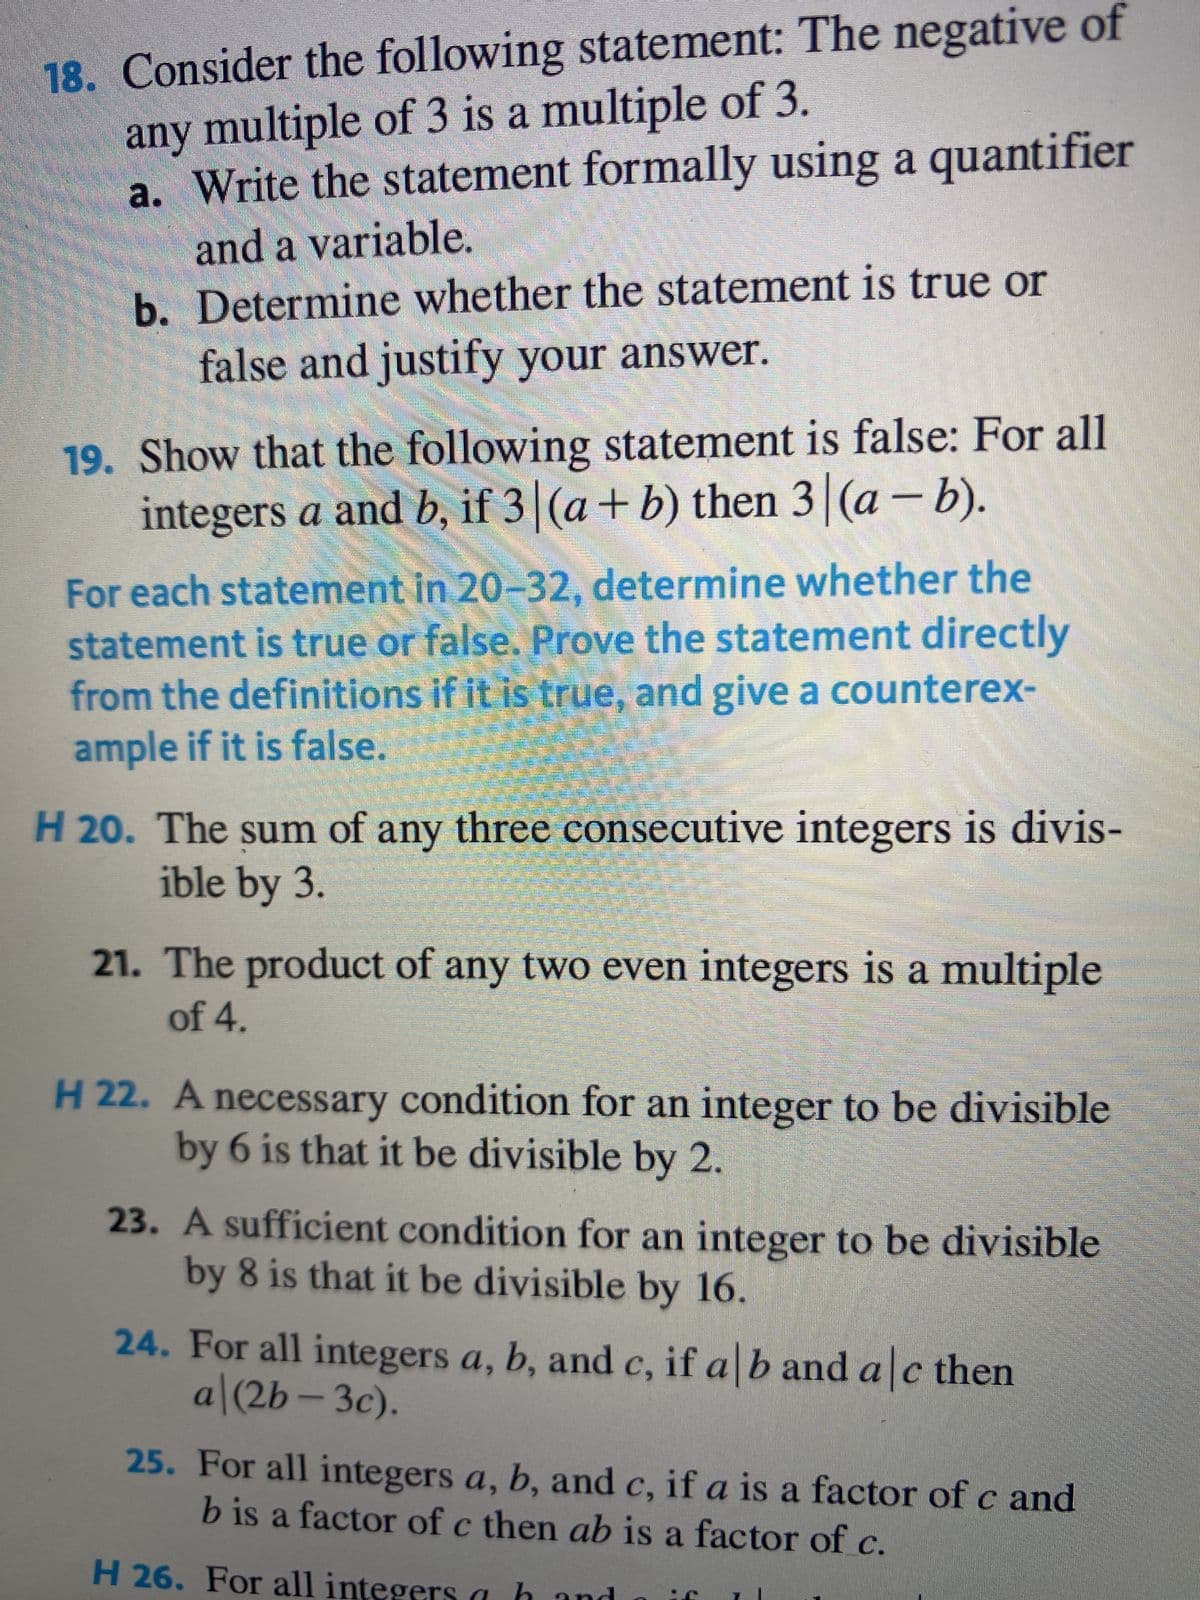 18. Consider the following statement: The negative of
any multiple of 3 is a multiple of 3.
a. Write the statement formally using a quantifier
and a variable.
b. Determine whether the statement is true or
false and justify your answer.
19. Show that the following statement is false: For all
integers a and b, if 3 (a + b) then 3 (a - b).
For each statement in 20-32, determine whether the
statement is true or false. Prove the statement directly
from the definitions if it is true, and give a counterex-
ample if it is false.
H 20. The sum of any three consecutive integers is divis-
ible by 3.
21. The product of any two even integers is a multiple
of 4.
H 22. A necessary condition for an integer to be divisible
by 6 is that it be divisible by 2.
23. A sufficient condition for an integer to be divisible
by 8 is that it be divisible by 16.
24. For all integers a, b, and c, if a b and a c then
a|(2b-3c).
25. For all integers a, b, and c, if a is a factor of c and
b is a factor of c then ab is a factor of c.
H 26. For all integers a
MANNE